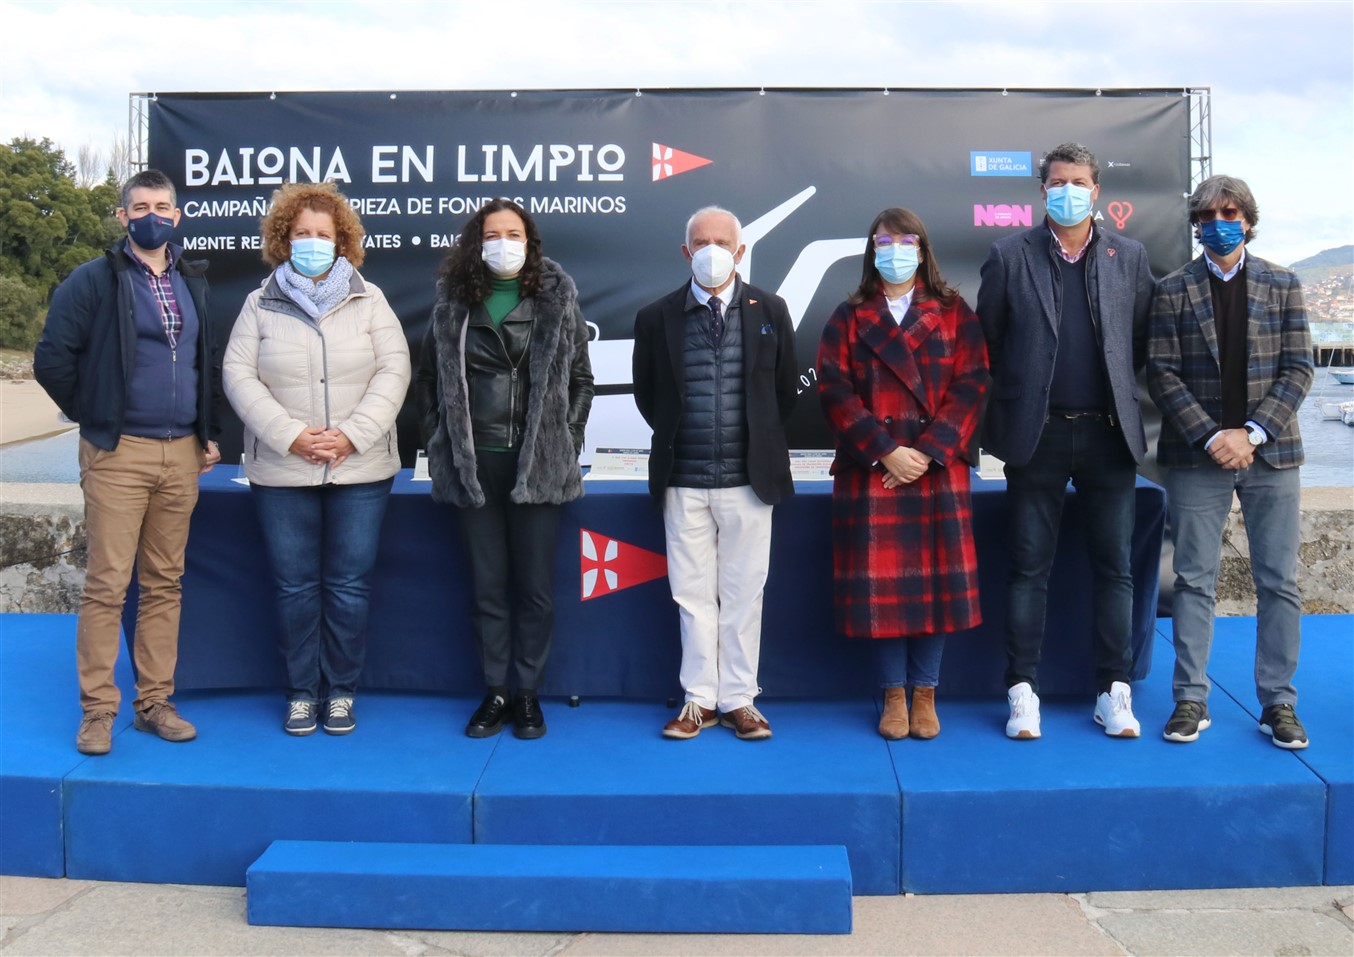 Monte Real promotes the campaign "Baiona clean" to clean up the seabed